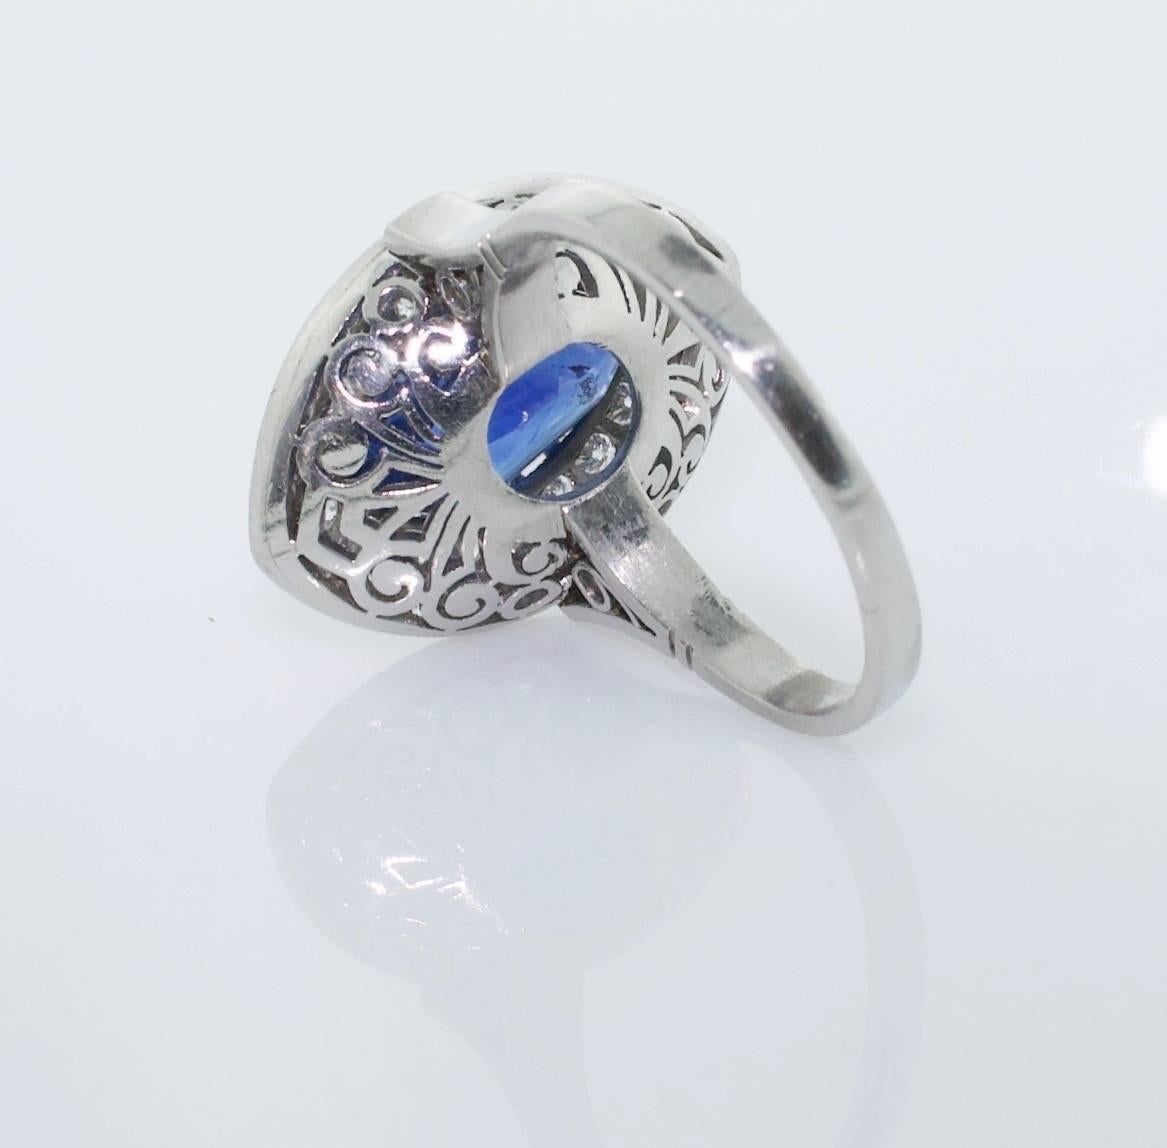 Important Sapphire and Diamond Ring in Platinum Circa 1960's
Featuring a Beautiful Marquise Cut Blue Sapphire weighing 5.10 carats (approximately)
Fifty Six Diamonds weighing .80 carats (approximately)
Very Fine and Unusual Filagree Work on The